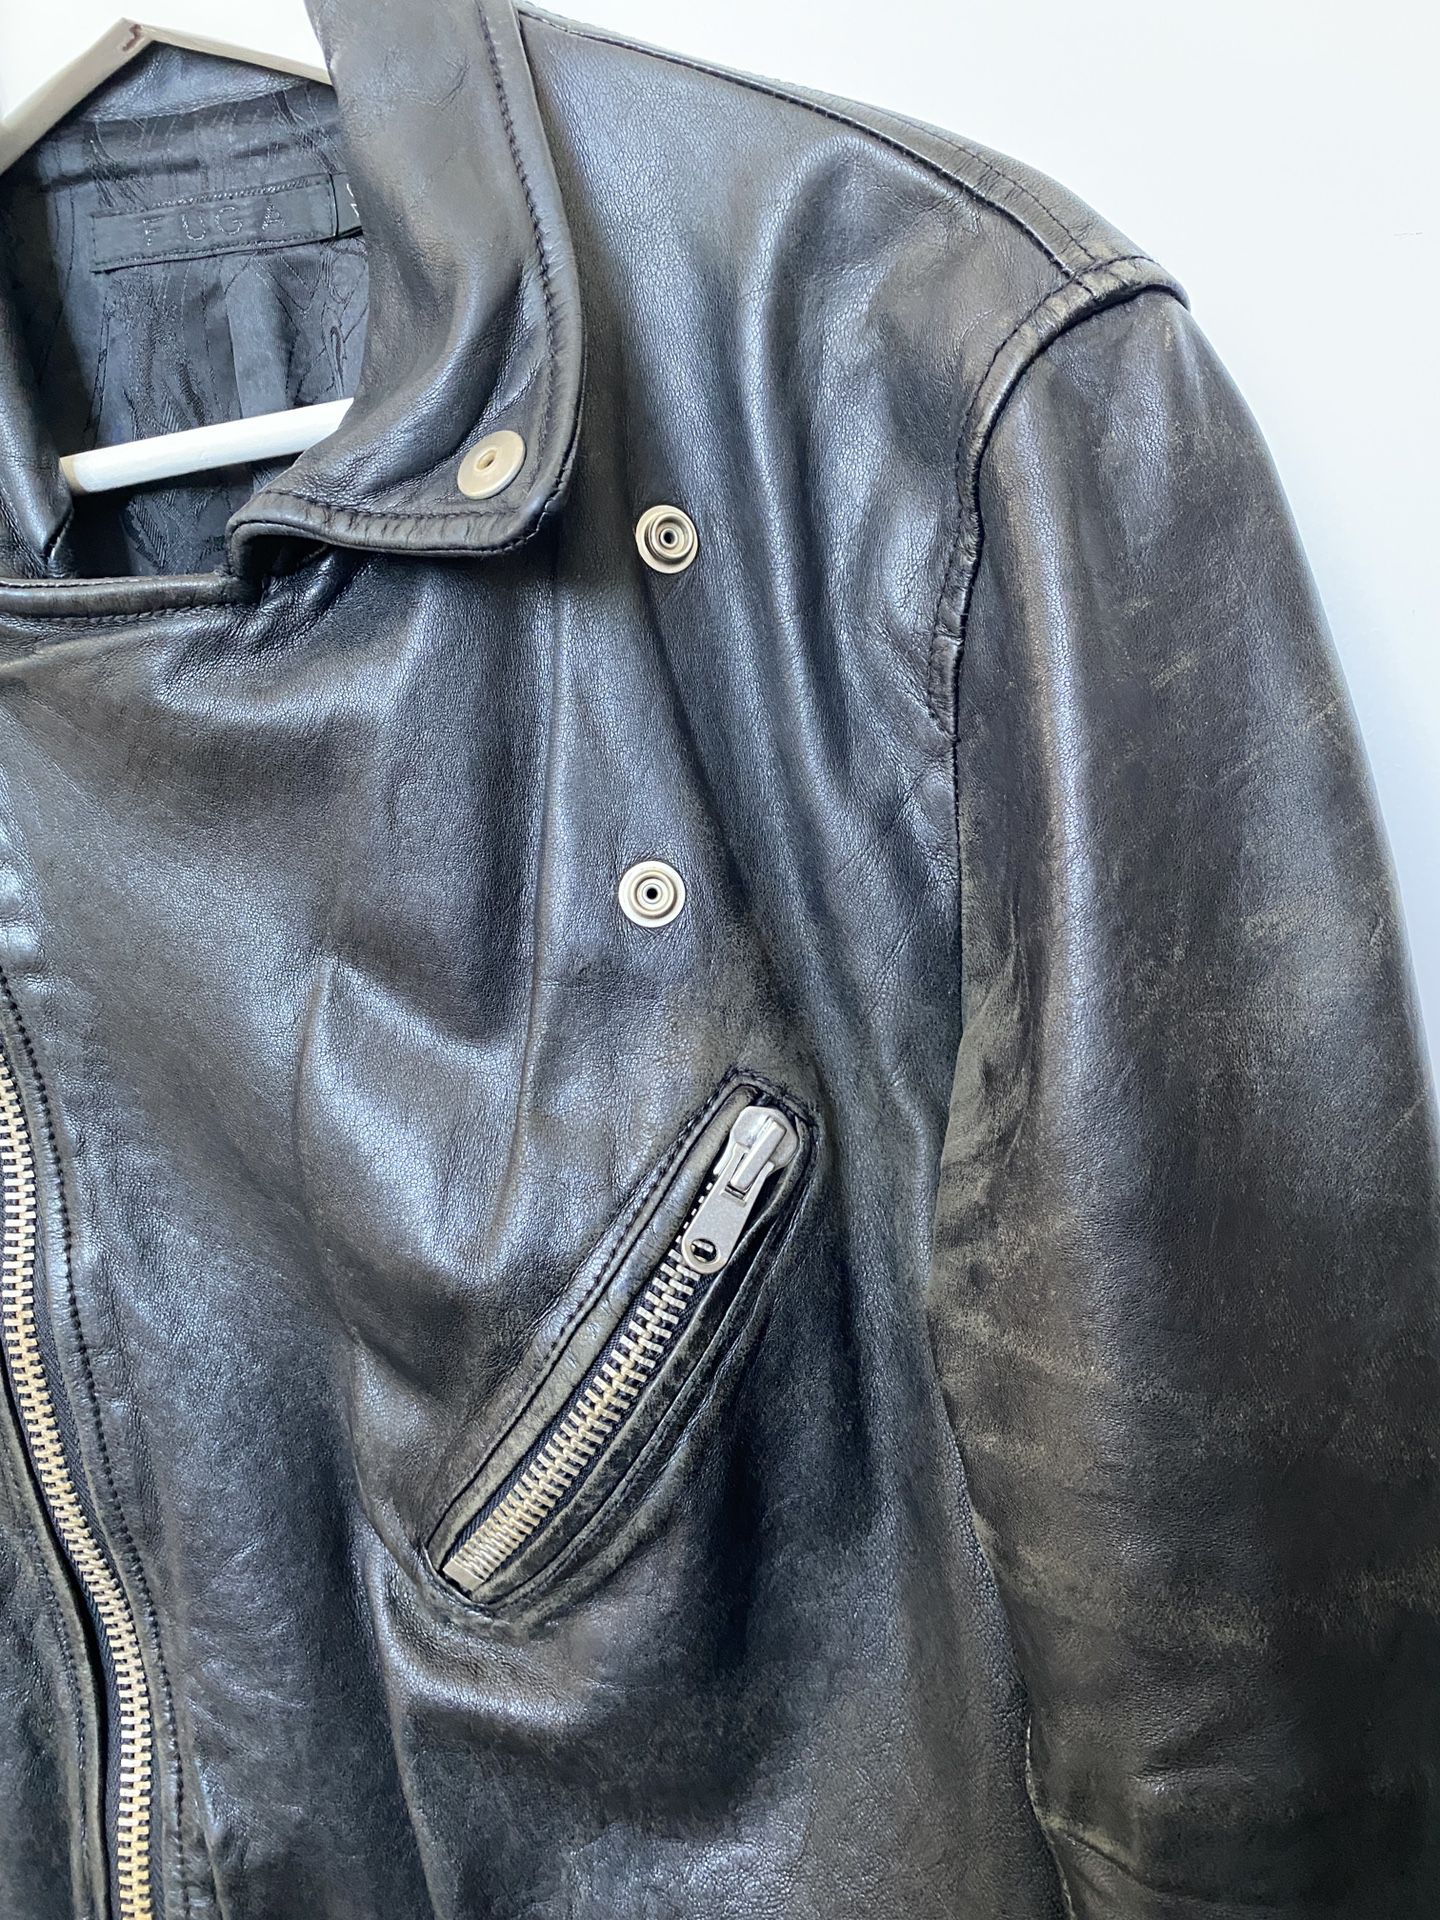 Japanese Luxury Brand “FUGA” Lamb Leather Jacket for Sale in Queens, NY -  OfferUp